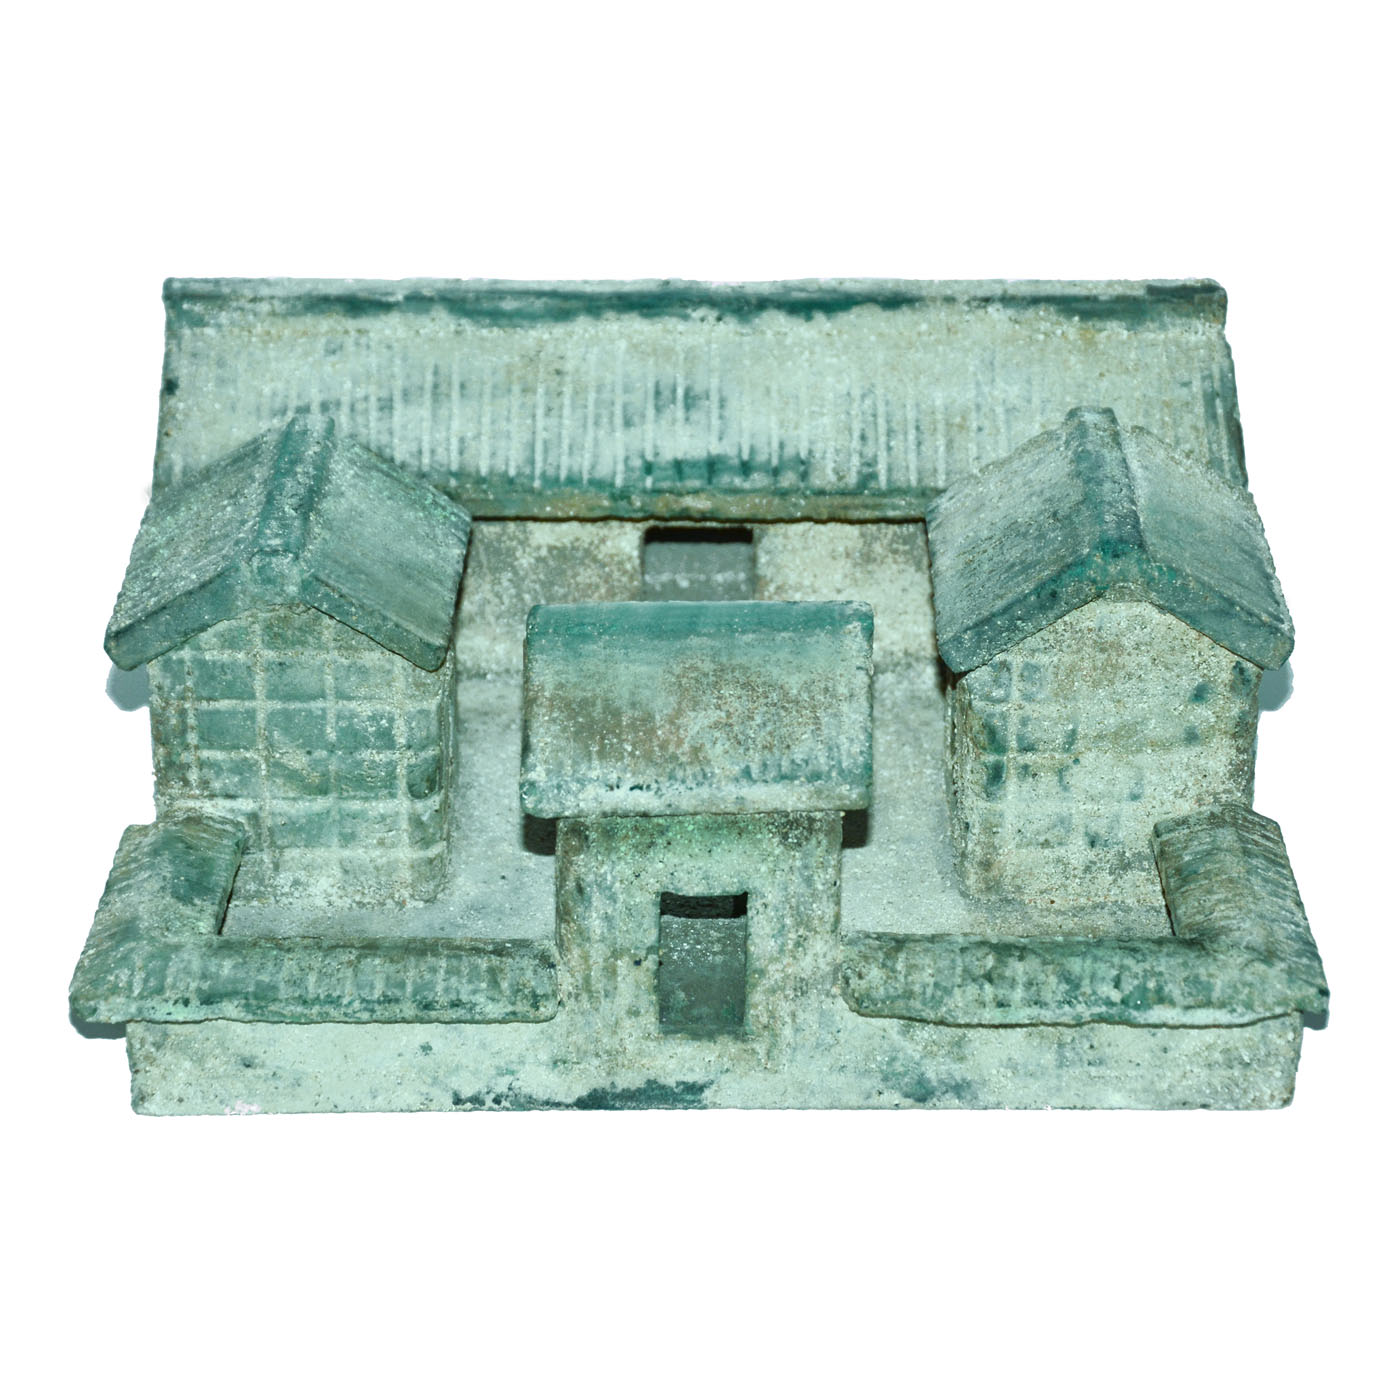 Ceremonial blue glass courtyard and houses from the Eastern Han dynasty. Estimate: $500,000.